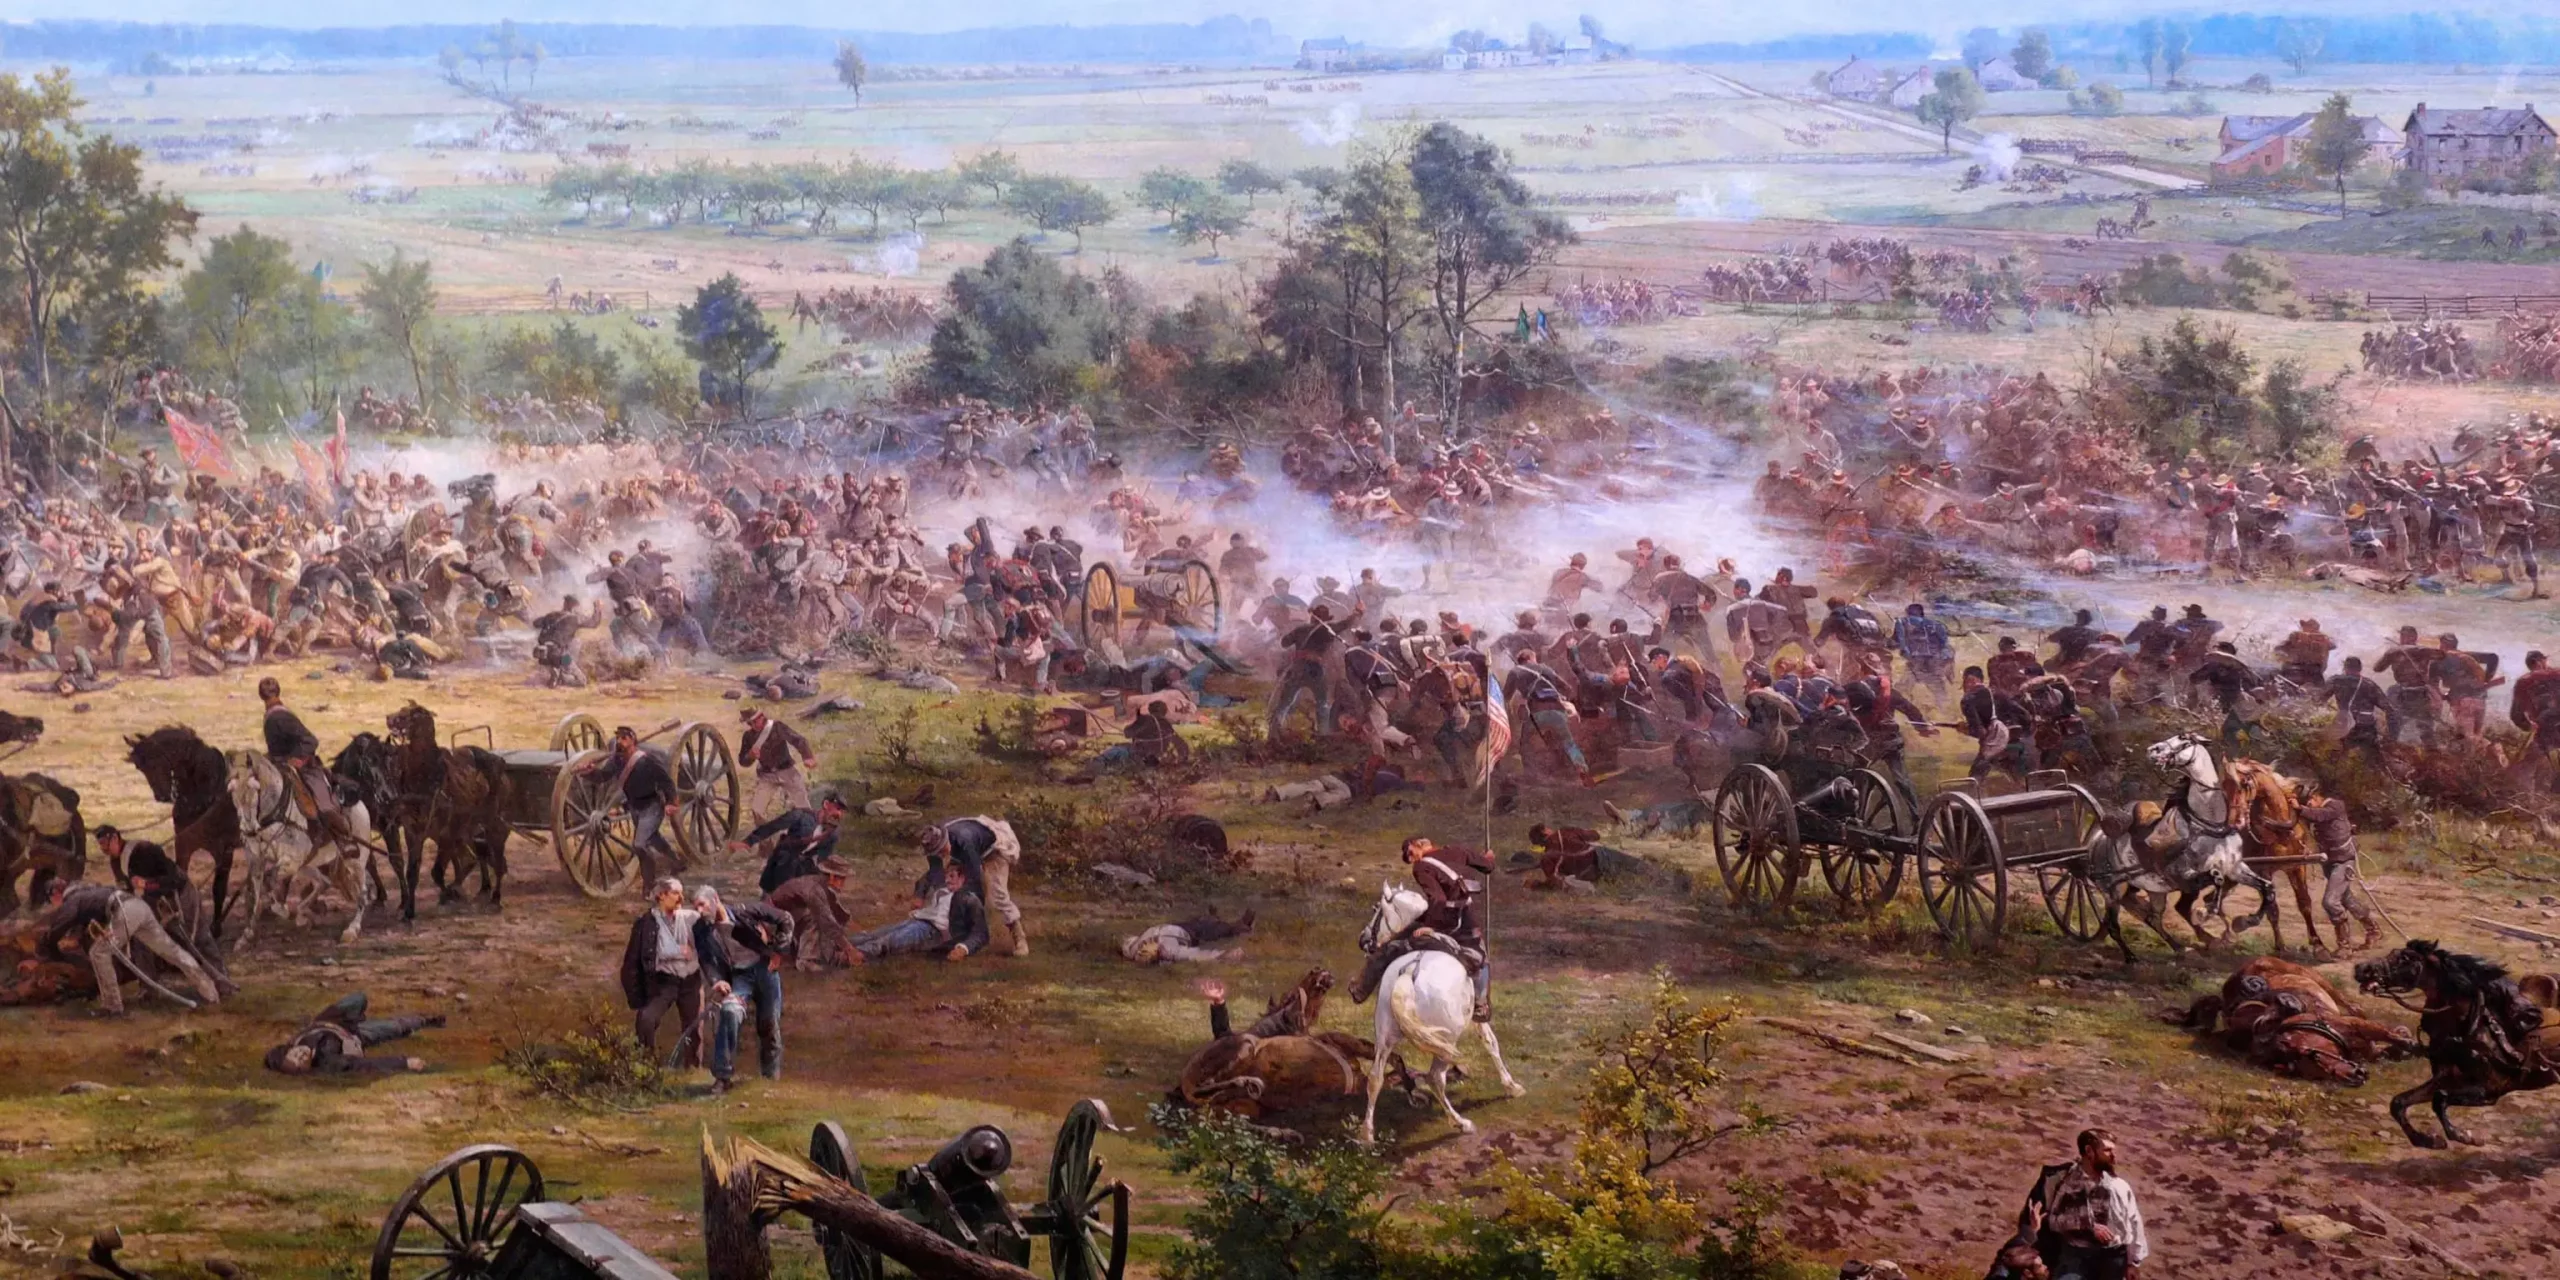 Panoramic view of the Battle of Gettysburg, showcasing the largest engagement of the American Civil War with Union and Confederate forces clashing.